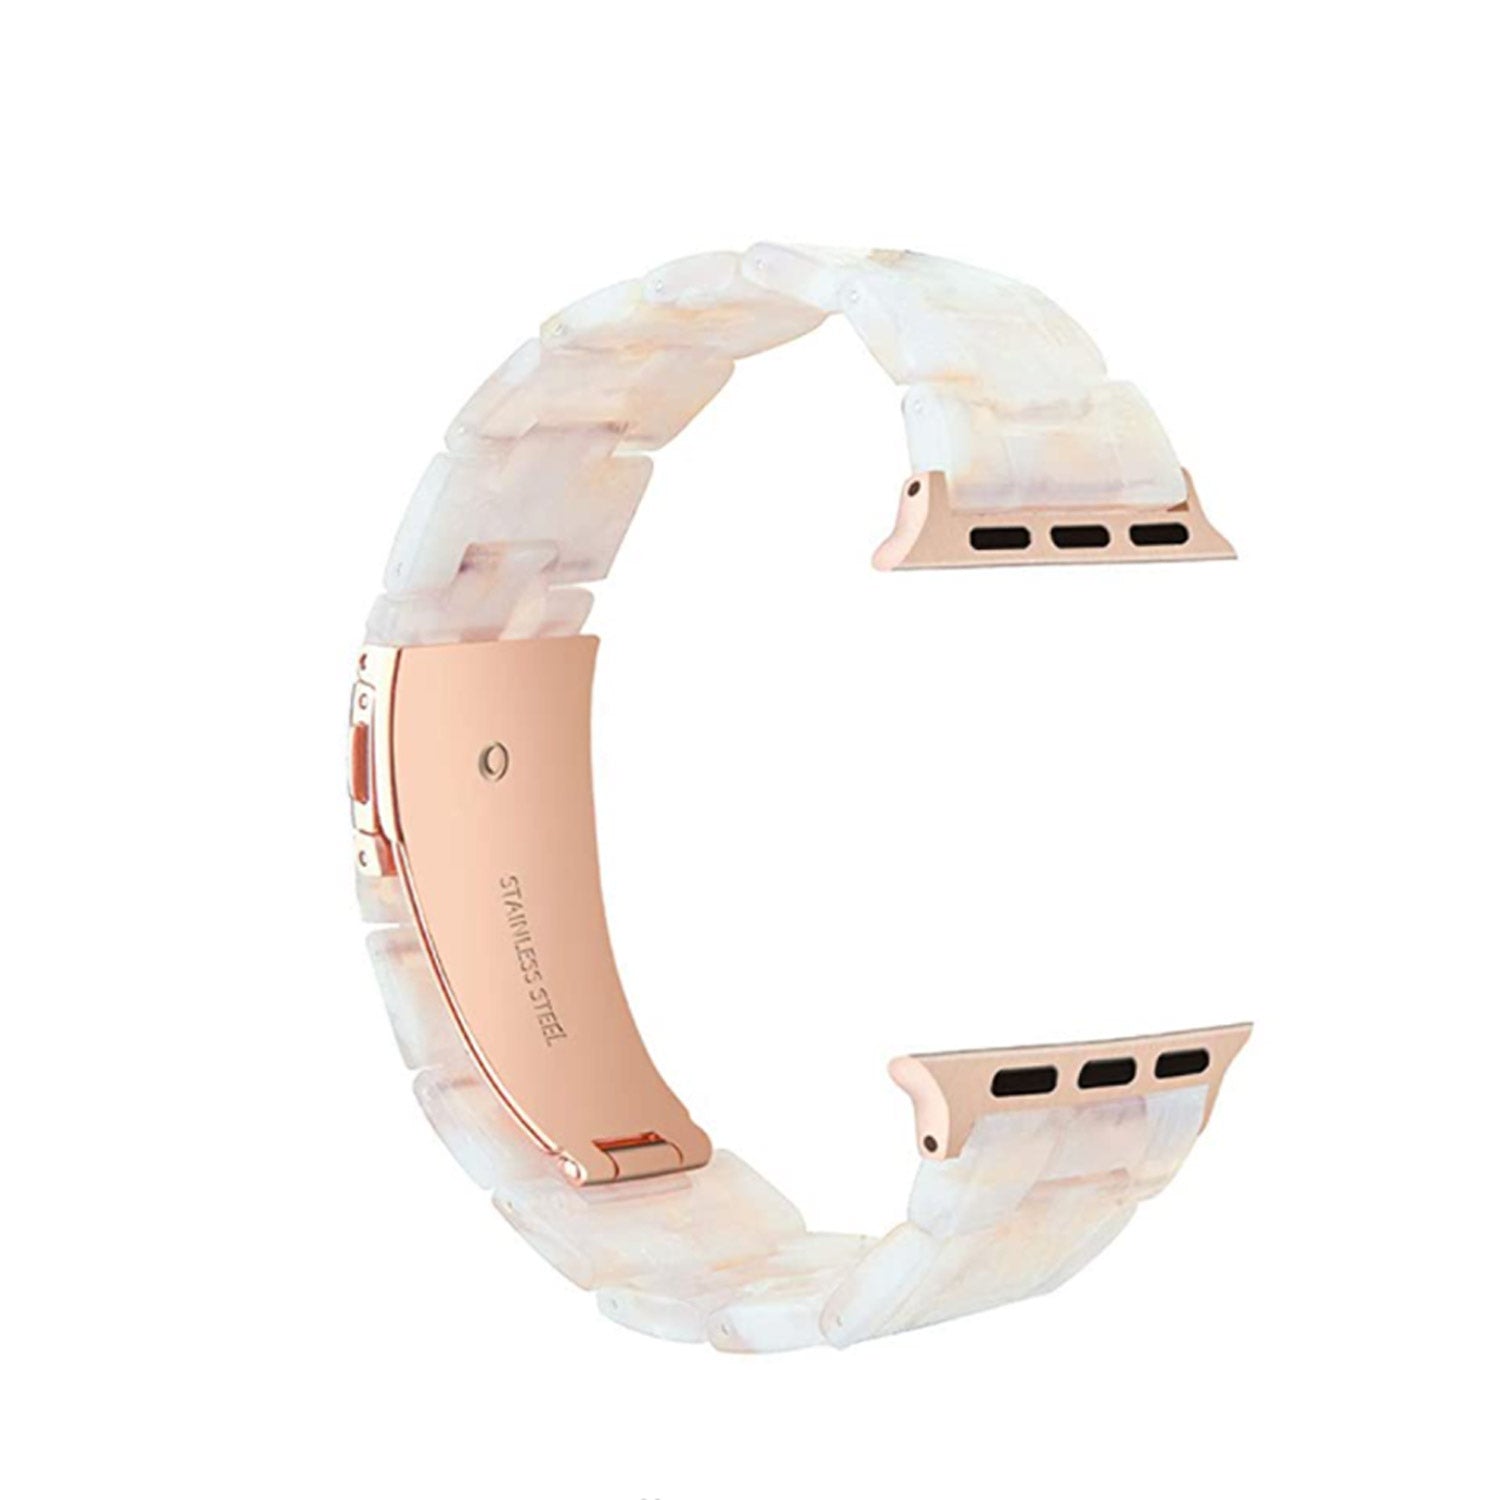 Tough On Apple Watch Band Series 4 / 5 / 6 / SE 44mm Resin Beige